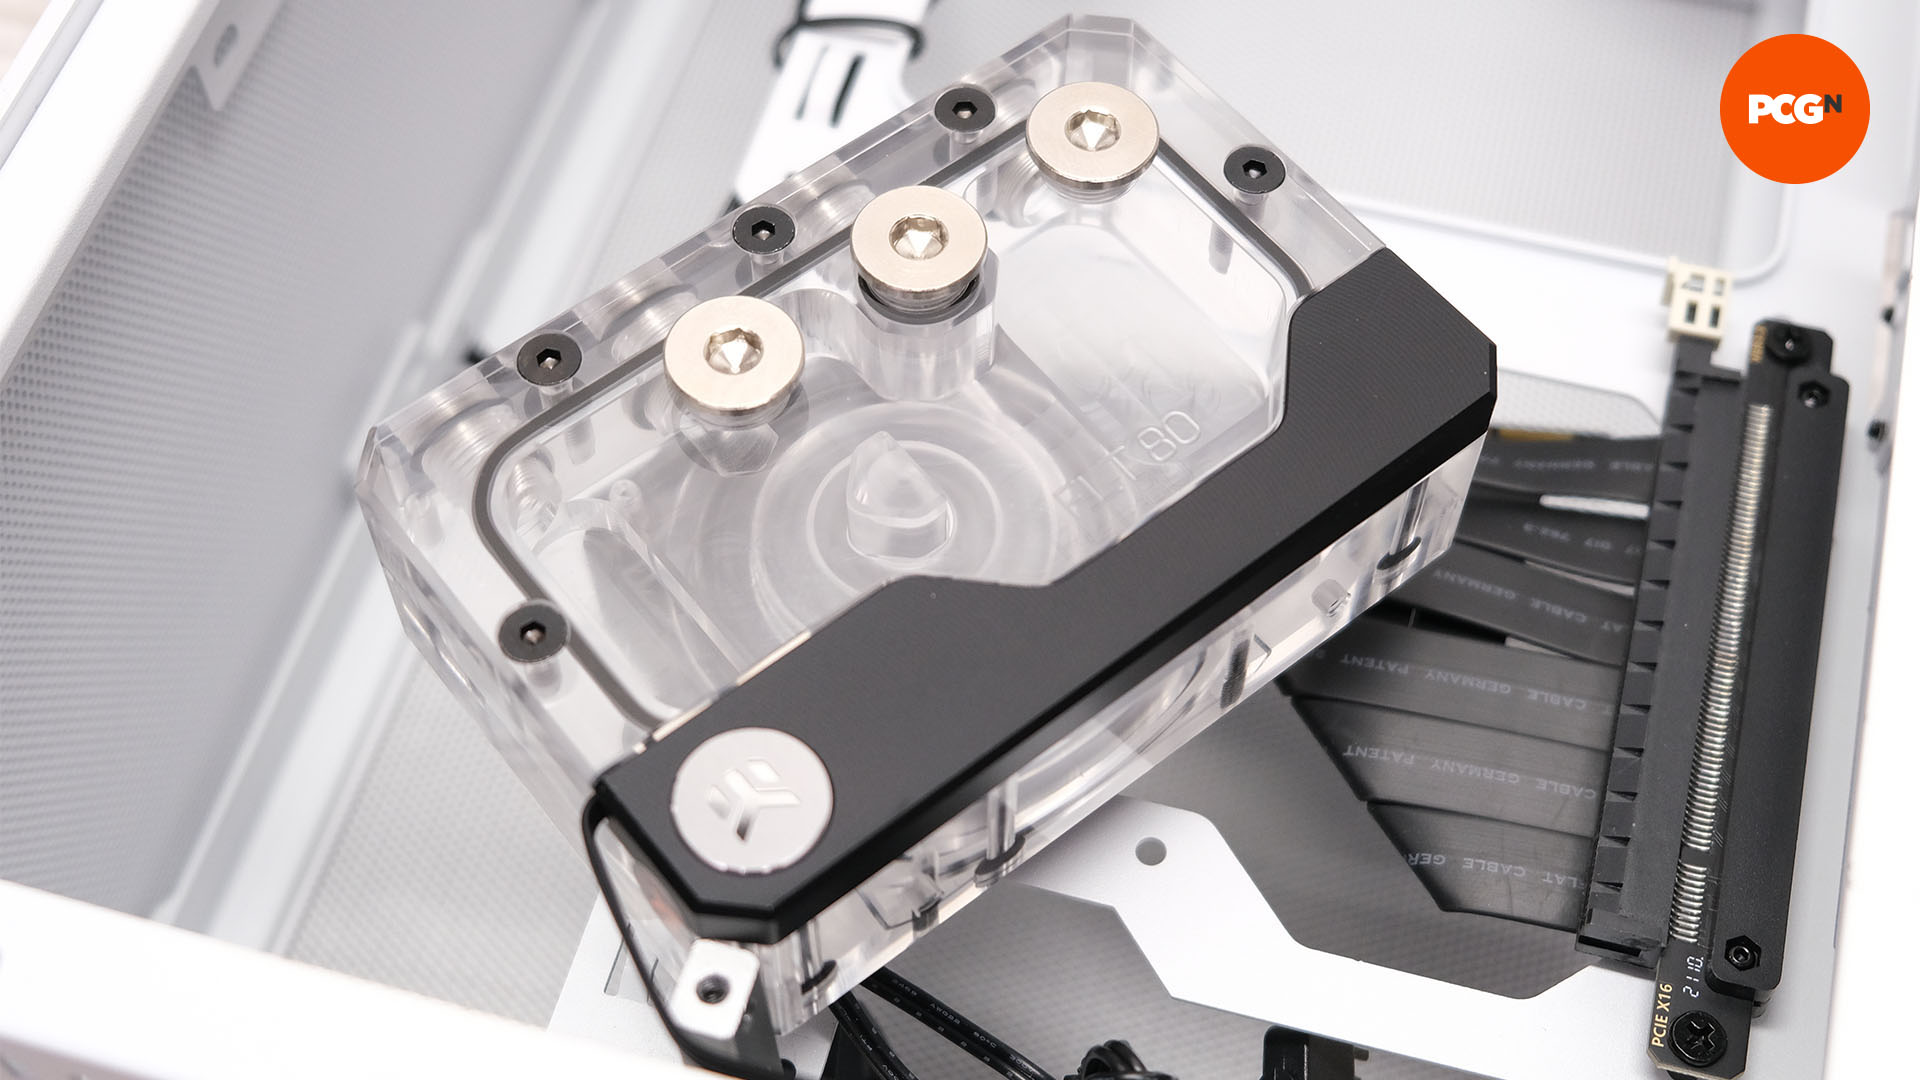 How to mount a reservoir: Choose the location in your PC case